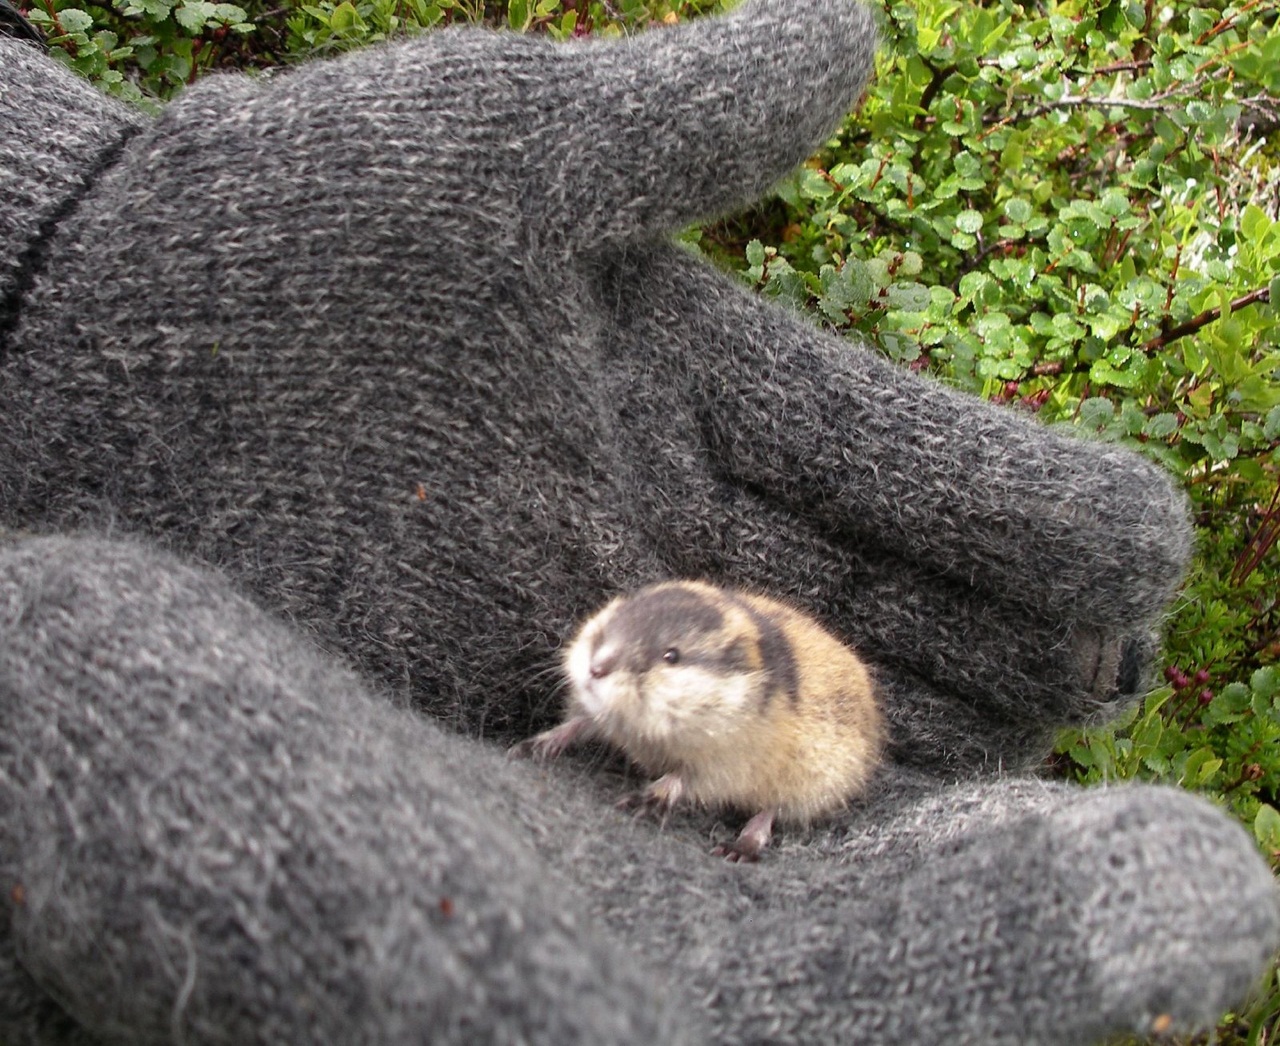 Lemming in the hands of man